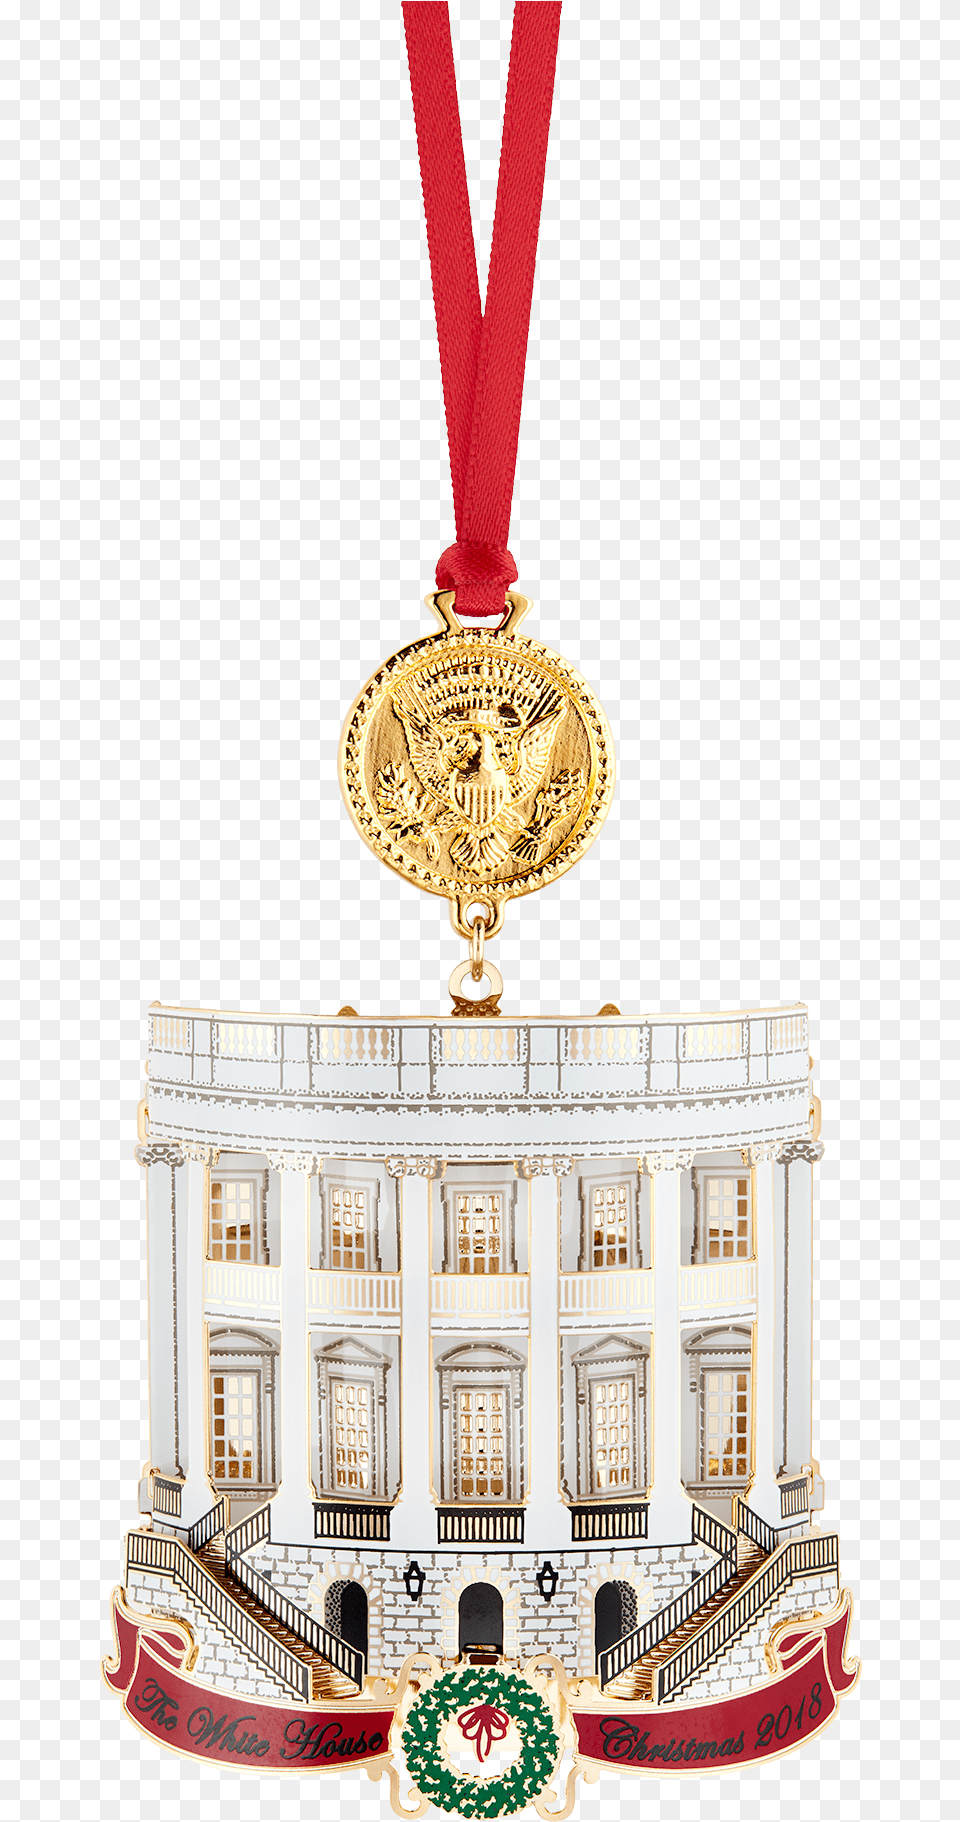 Official 2018 White House Christmas Ornament Ornaments, Gold, Architecture, Building, Accessories Png Image